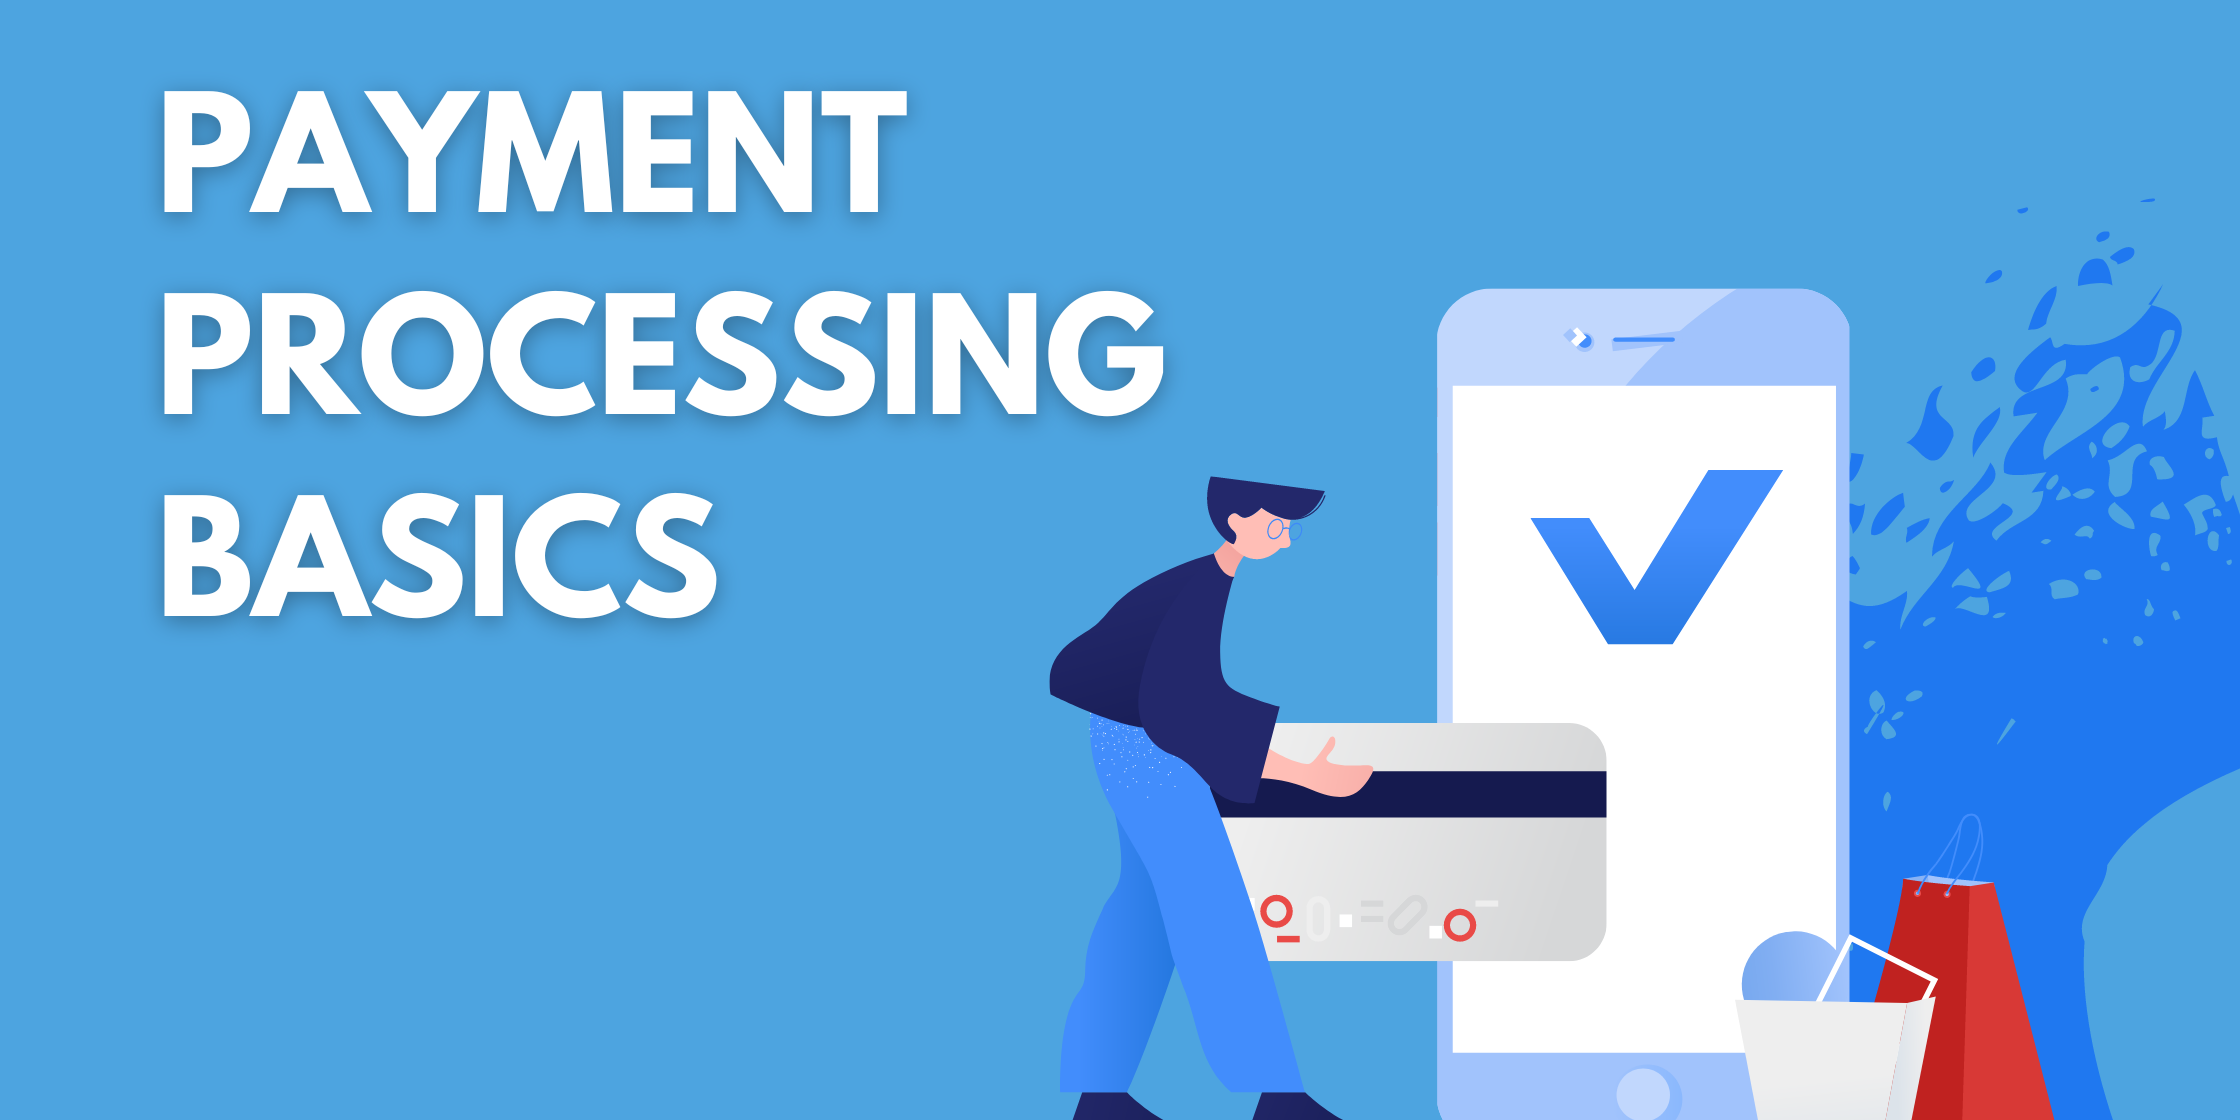 Payment Processing: What is it, and how does it work?